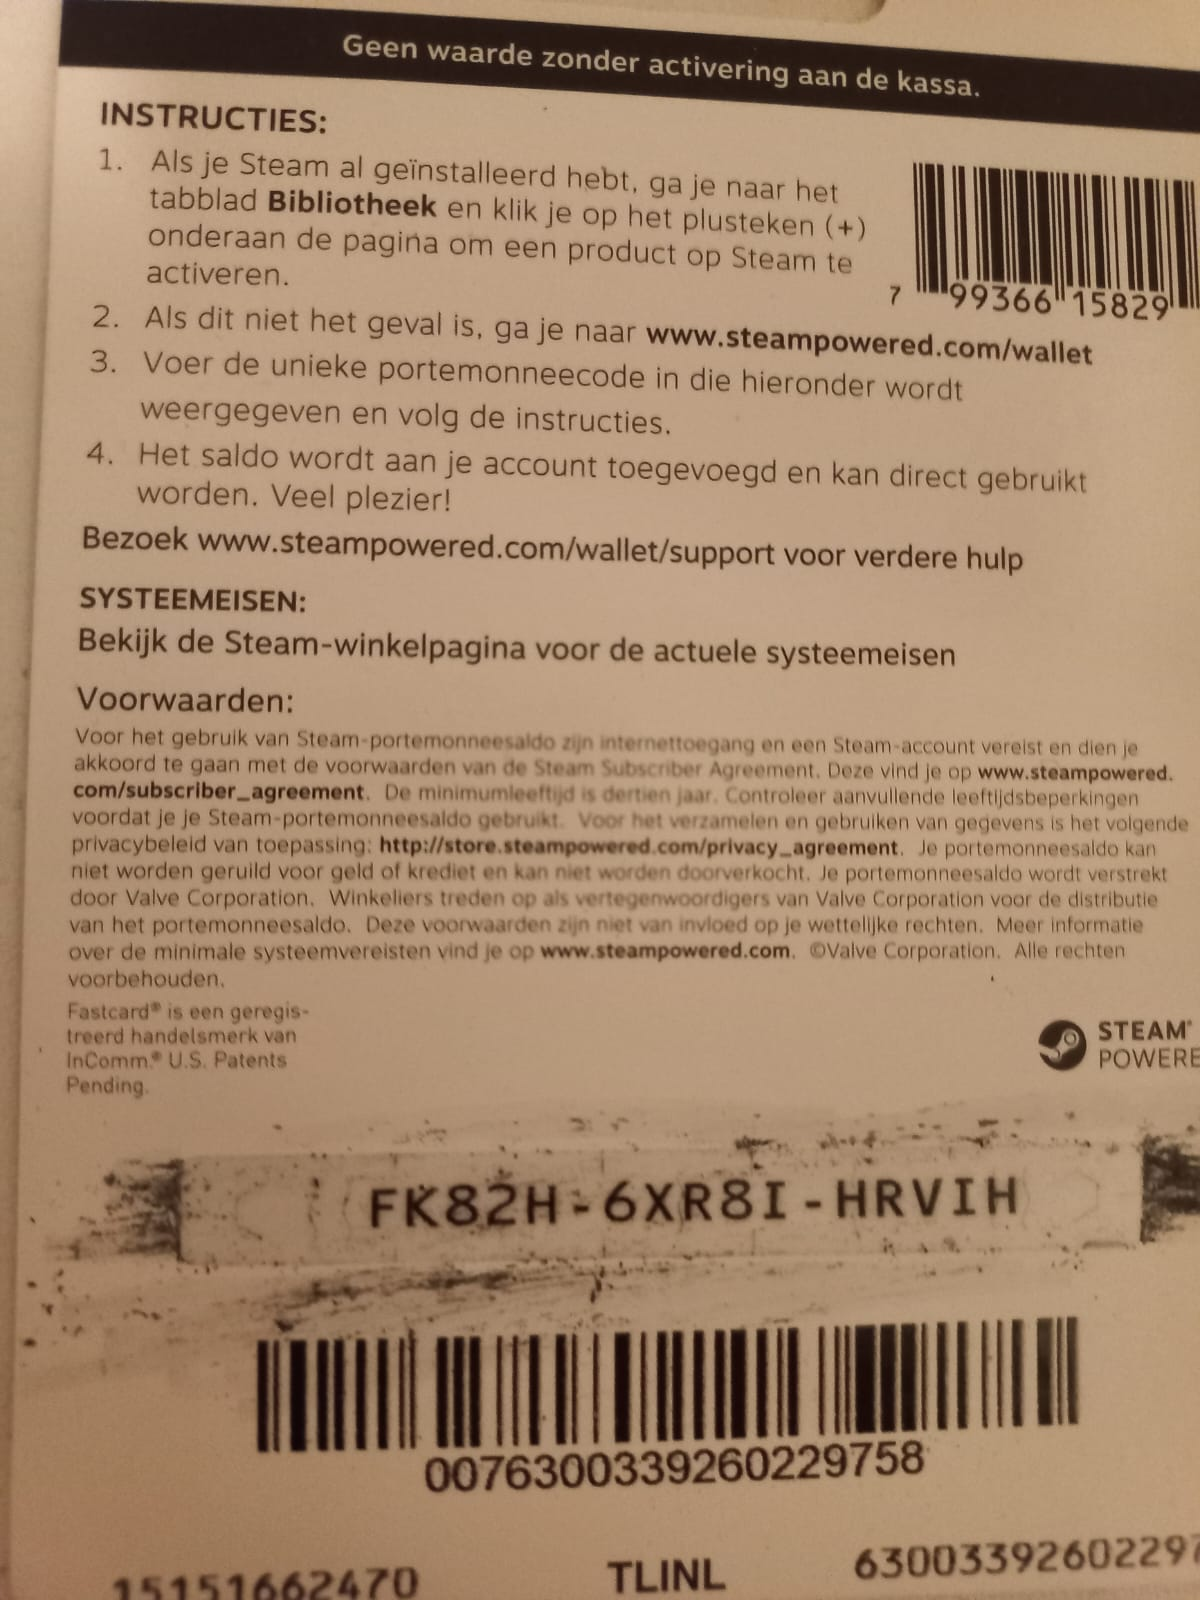 A Picture of a Physical Euro Steam Gift Card.